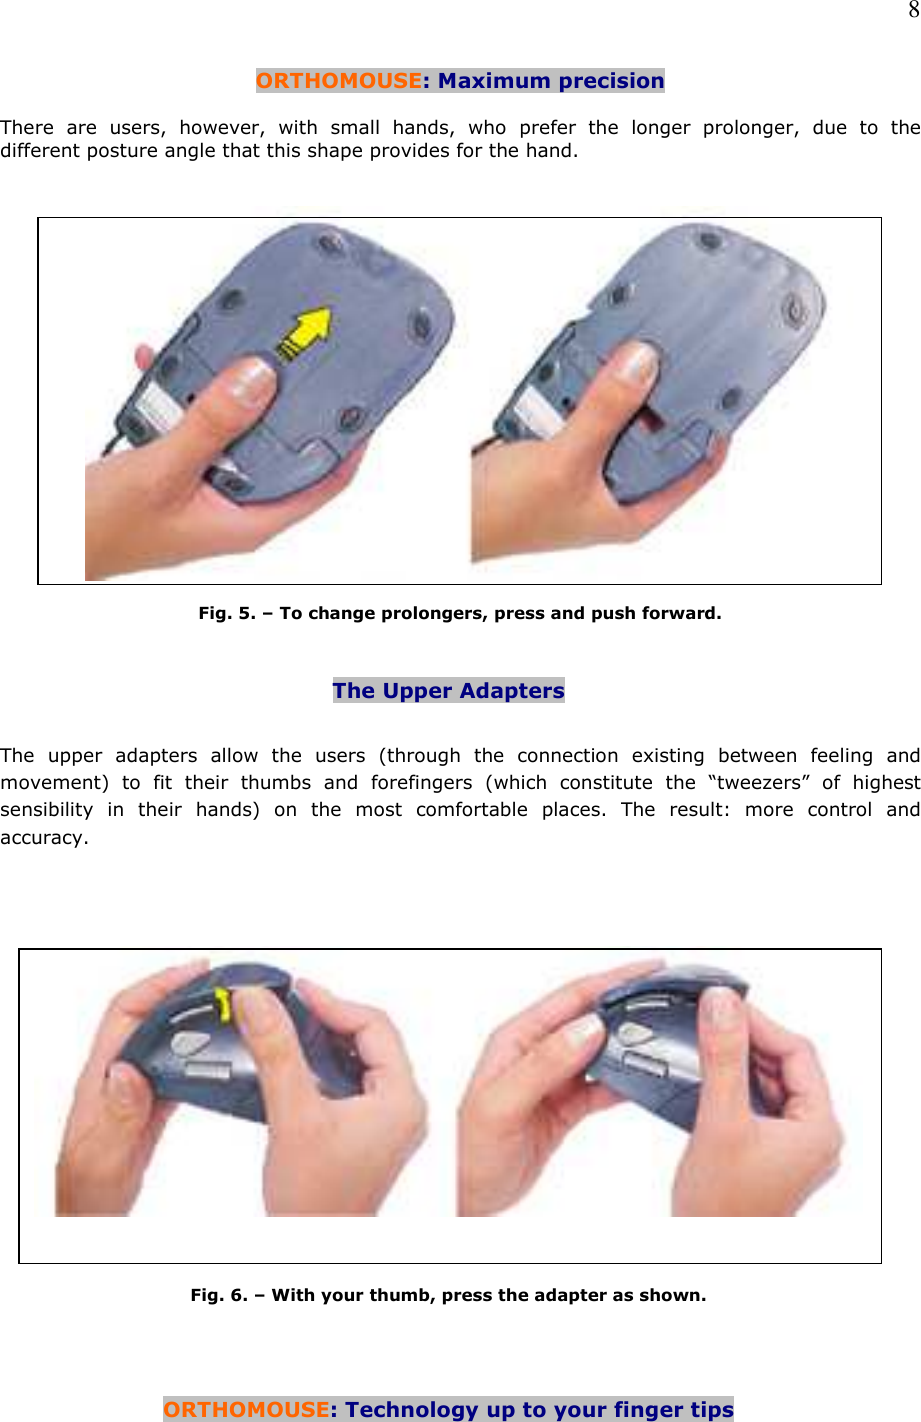   8 ORTHOMOUSE: Maximum precision  There  are  users,  however,  with  small  hands,  who  prefer  the  longer  prolonger,  due  to  the different posture angle that this shape provides for the hand.     Fig. 5. – To change prolongers, press and push forward.   The Upper Adapters   The  upper  adapters  allow  the  users  (through  the  connection  existing  between  feeling  and movement)  to  fit  their  thumbs  and  forefingers  (which  constitute  the  “tweezers”  of  highest sensibility  in  their  hands)  on  the  most  comfortable  places.  The  result:  more  control  and accuracy.         Fig. 6. – With your thumb, press the adapter as shown.     ORTHOMOUSE: Technology up to your finger tips   